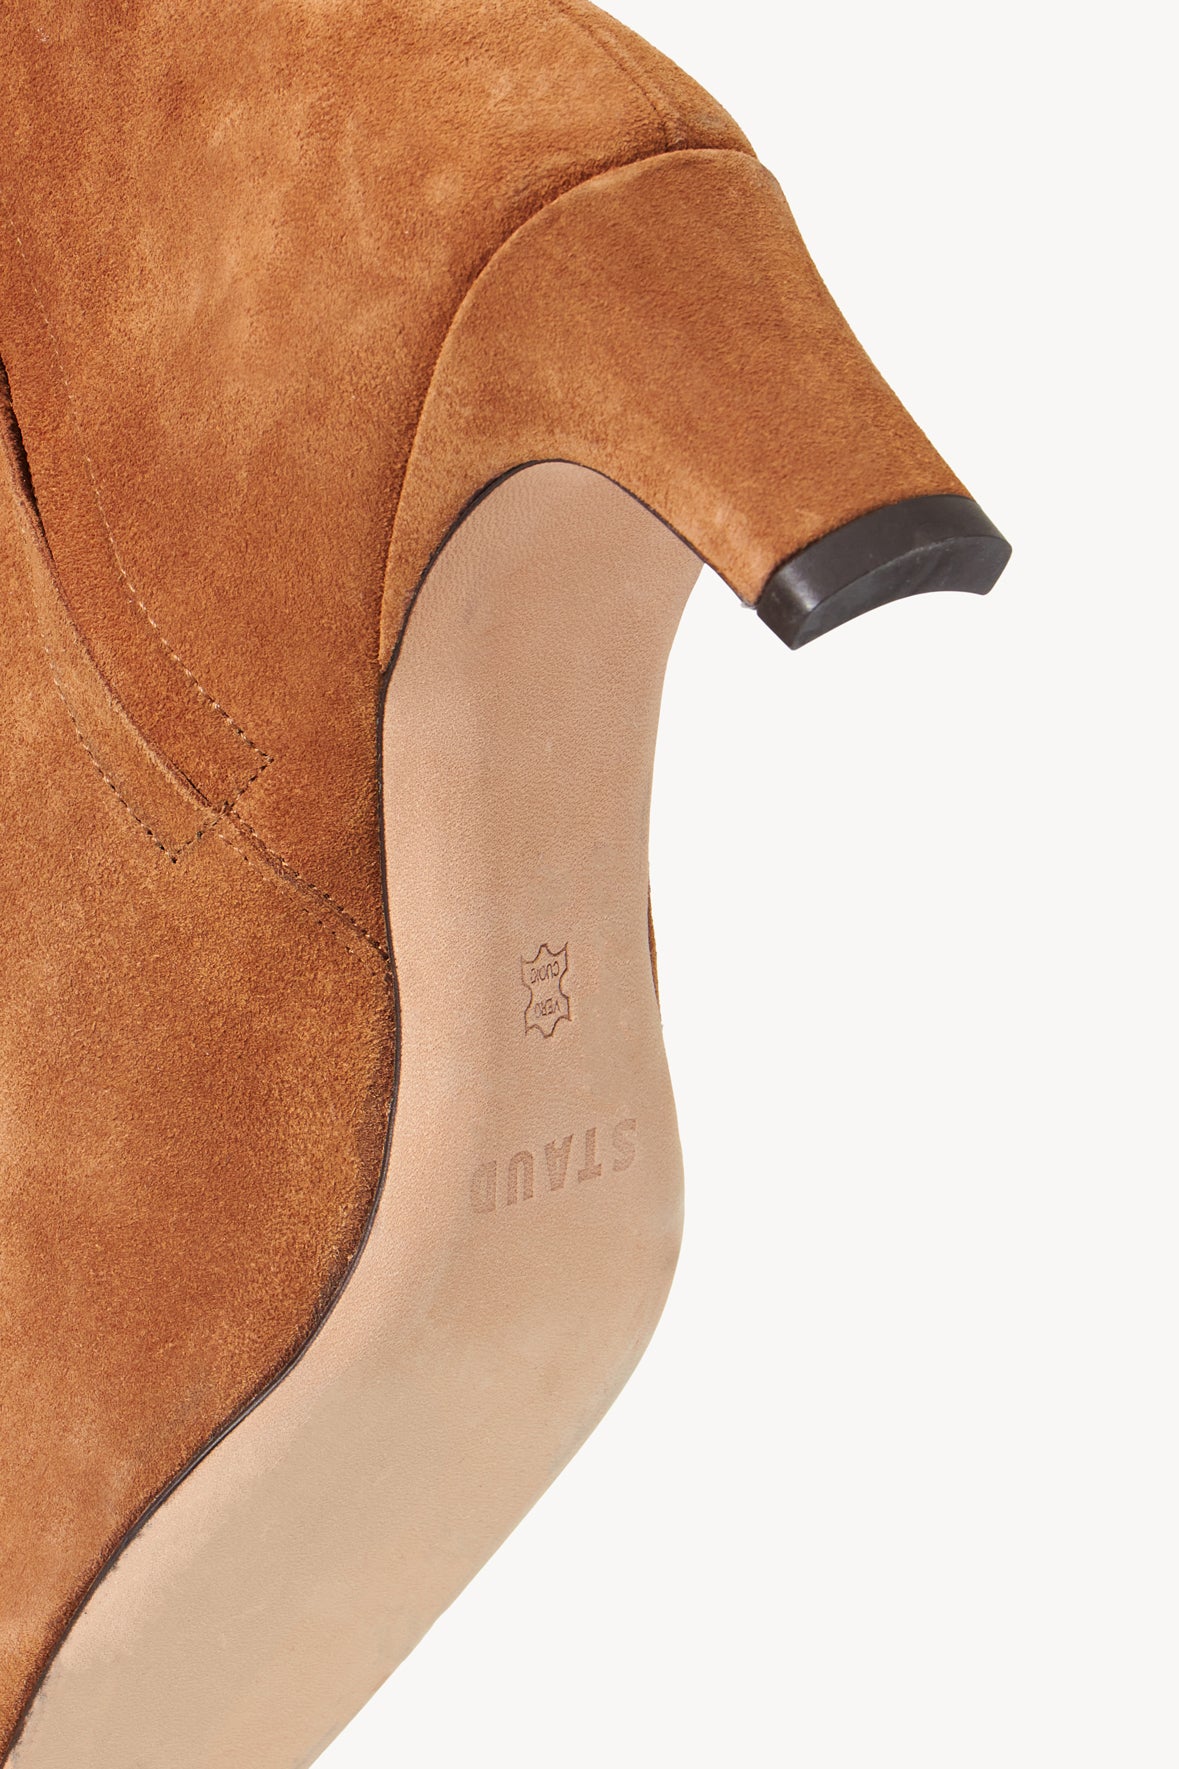 Wally Ankle Boot, Tan Suede